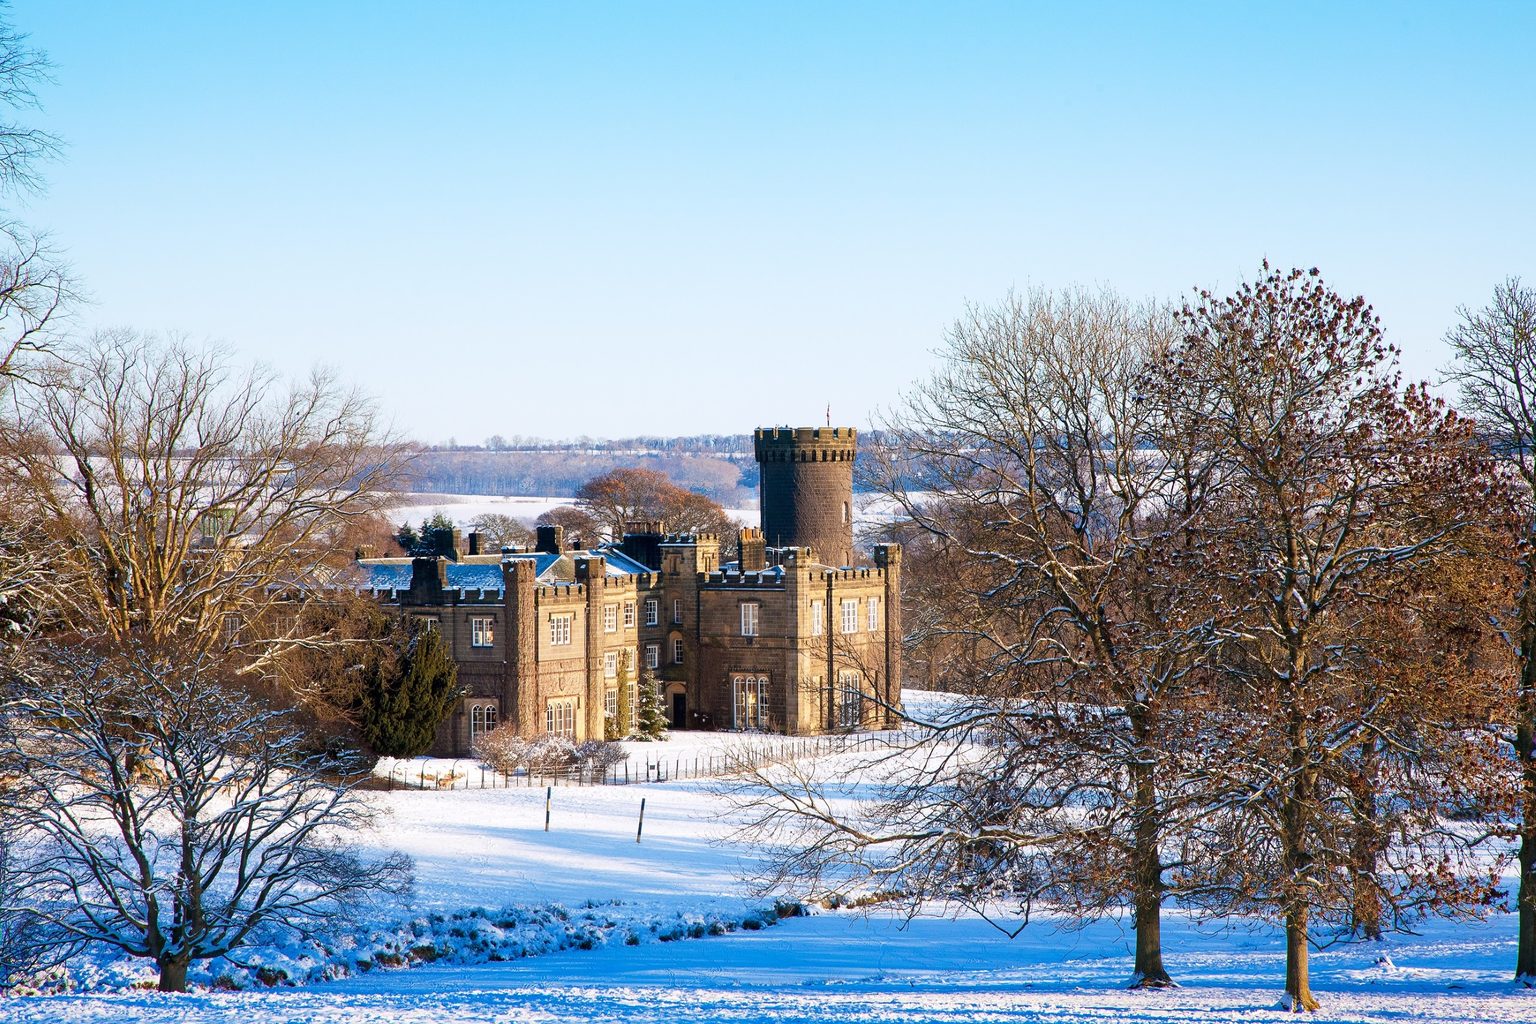 The castle-like exterior of Swinton Park Hotel surrounded by winter snow during at Christmas on the Swinton Estate Harrogate and the North Yorkshire Dales.